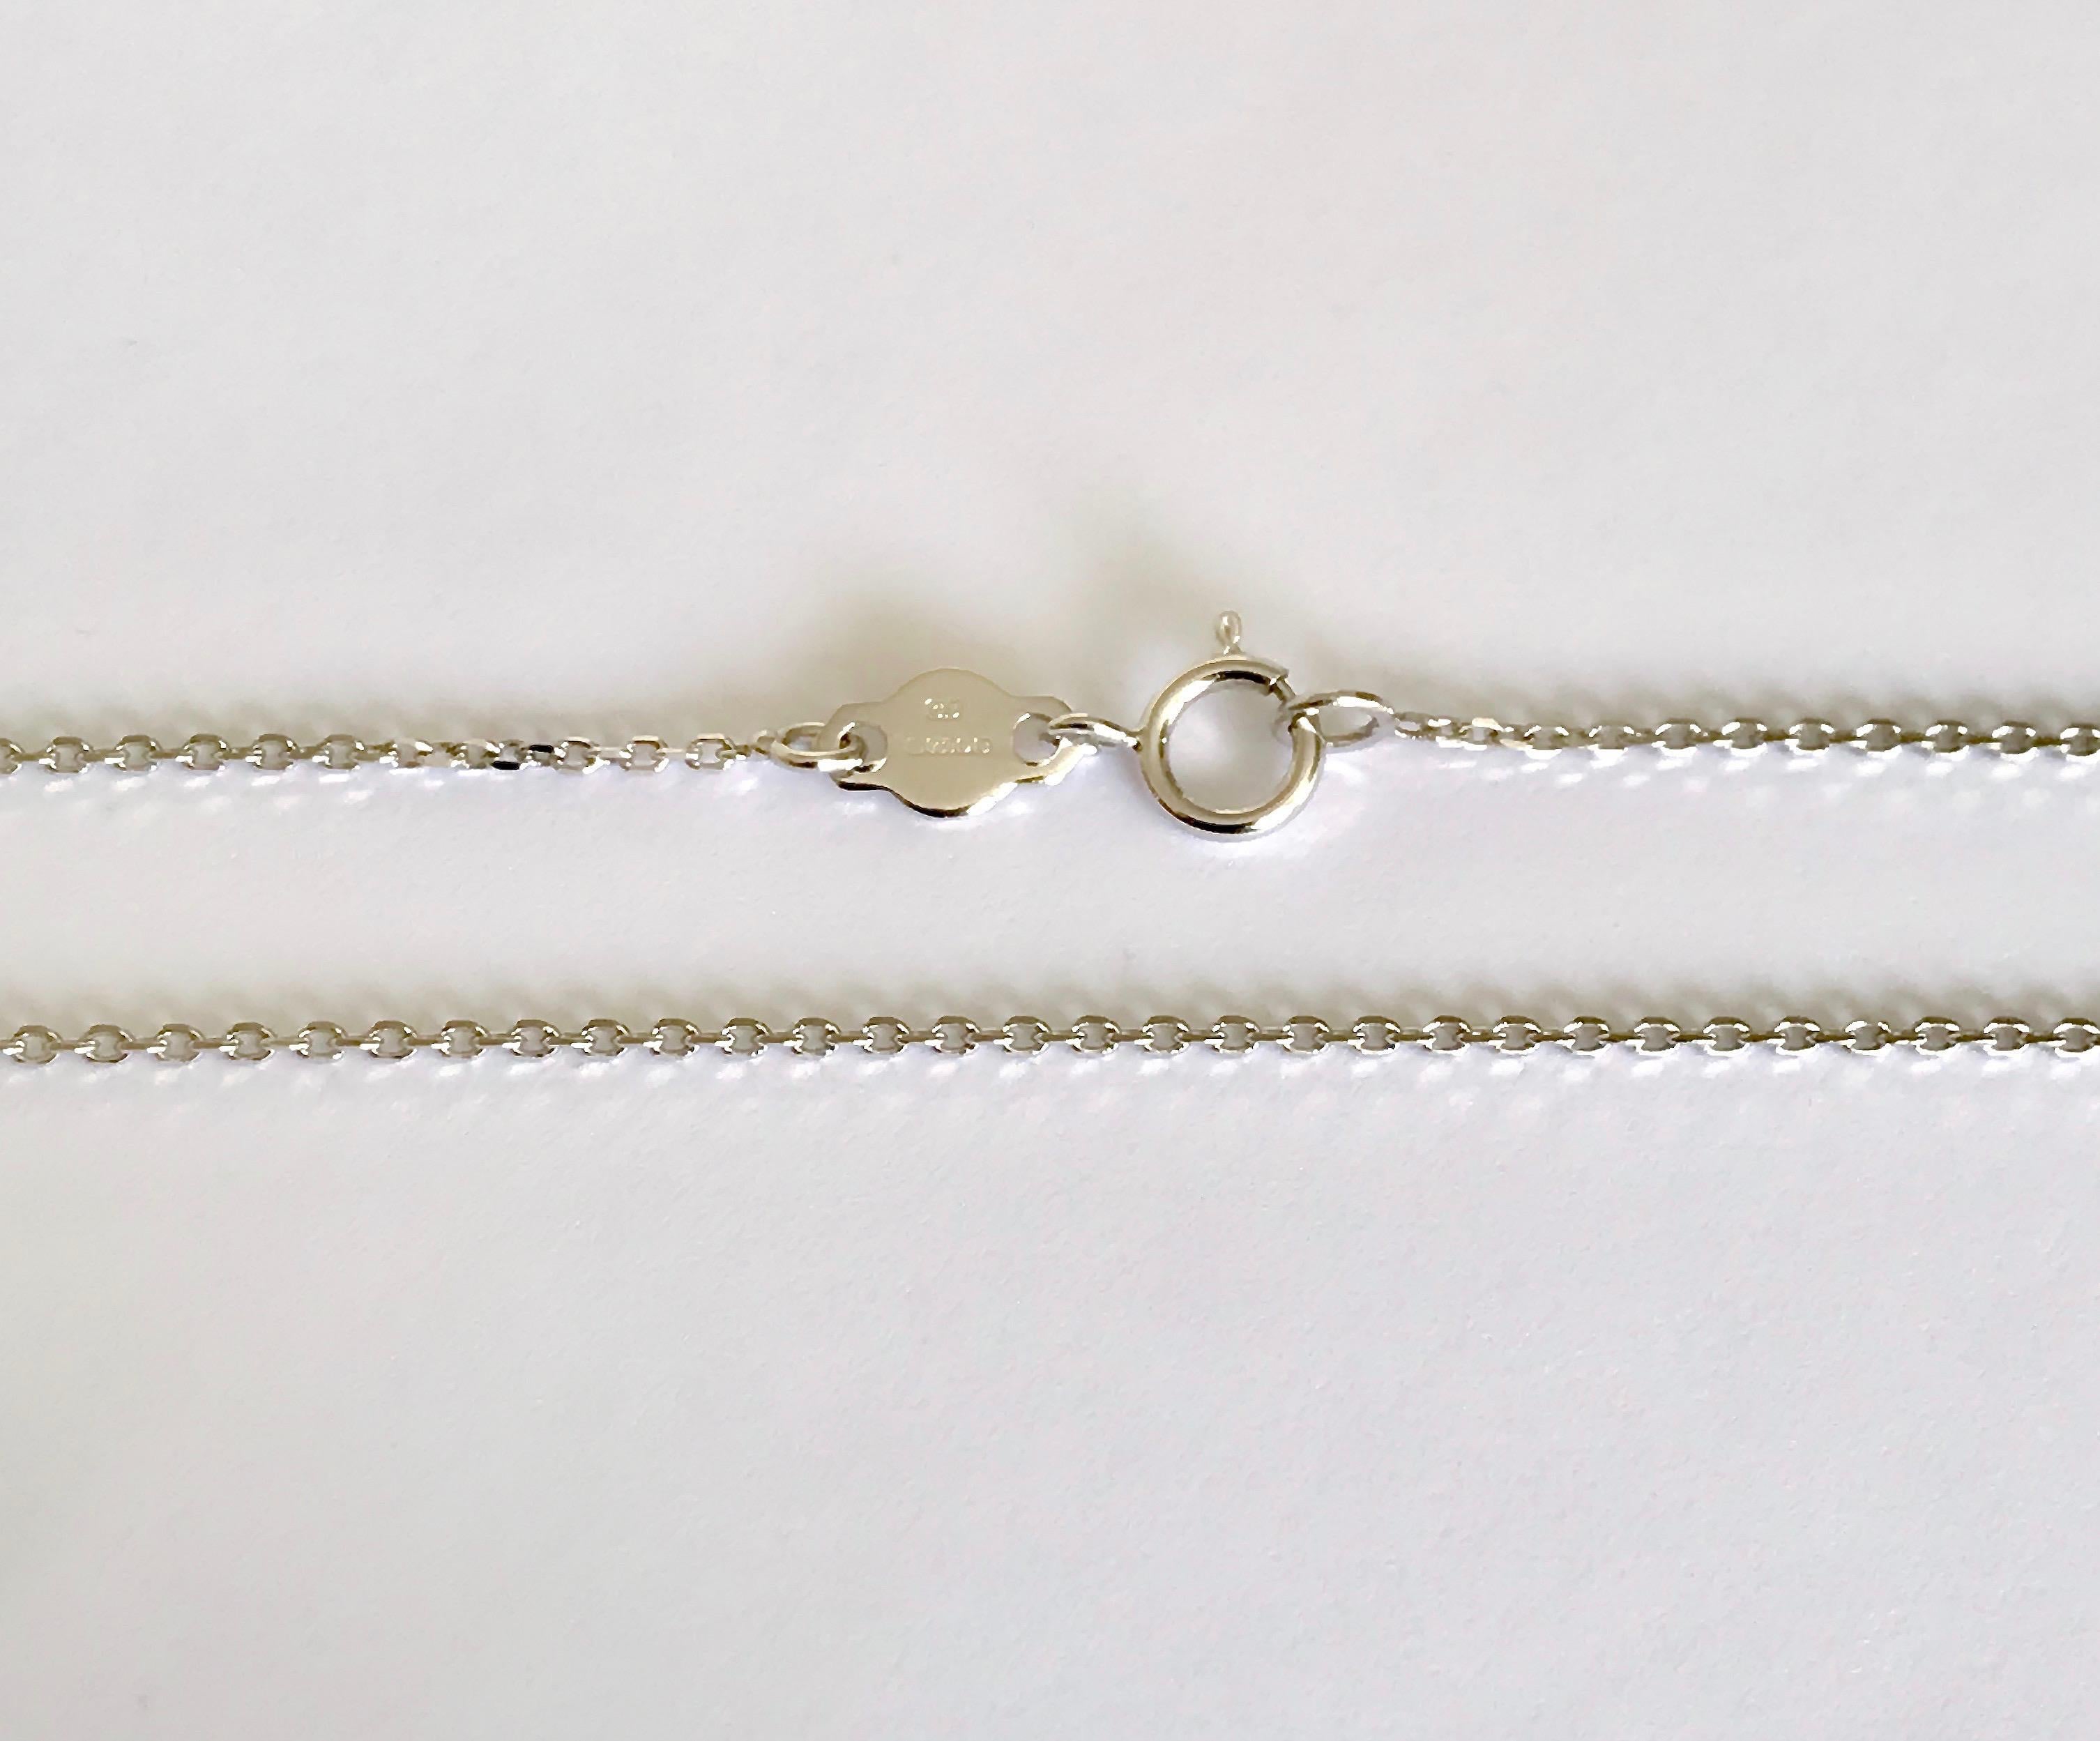 This fine chain is made of 18 Karat solid white gold.
Weight: 1.75 g
Length : 45.00 cm 
Gauge:  0.8 mm
Hallmark: London’s Goldsmiths’ Company –  Assay Office 
All our jewellery are new and have never been previously owned or worn. 
We are a member